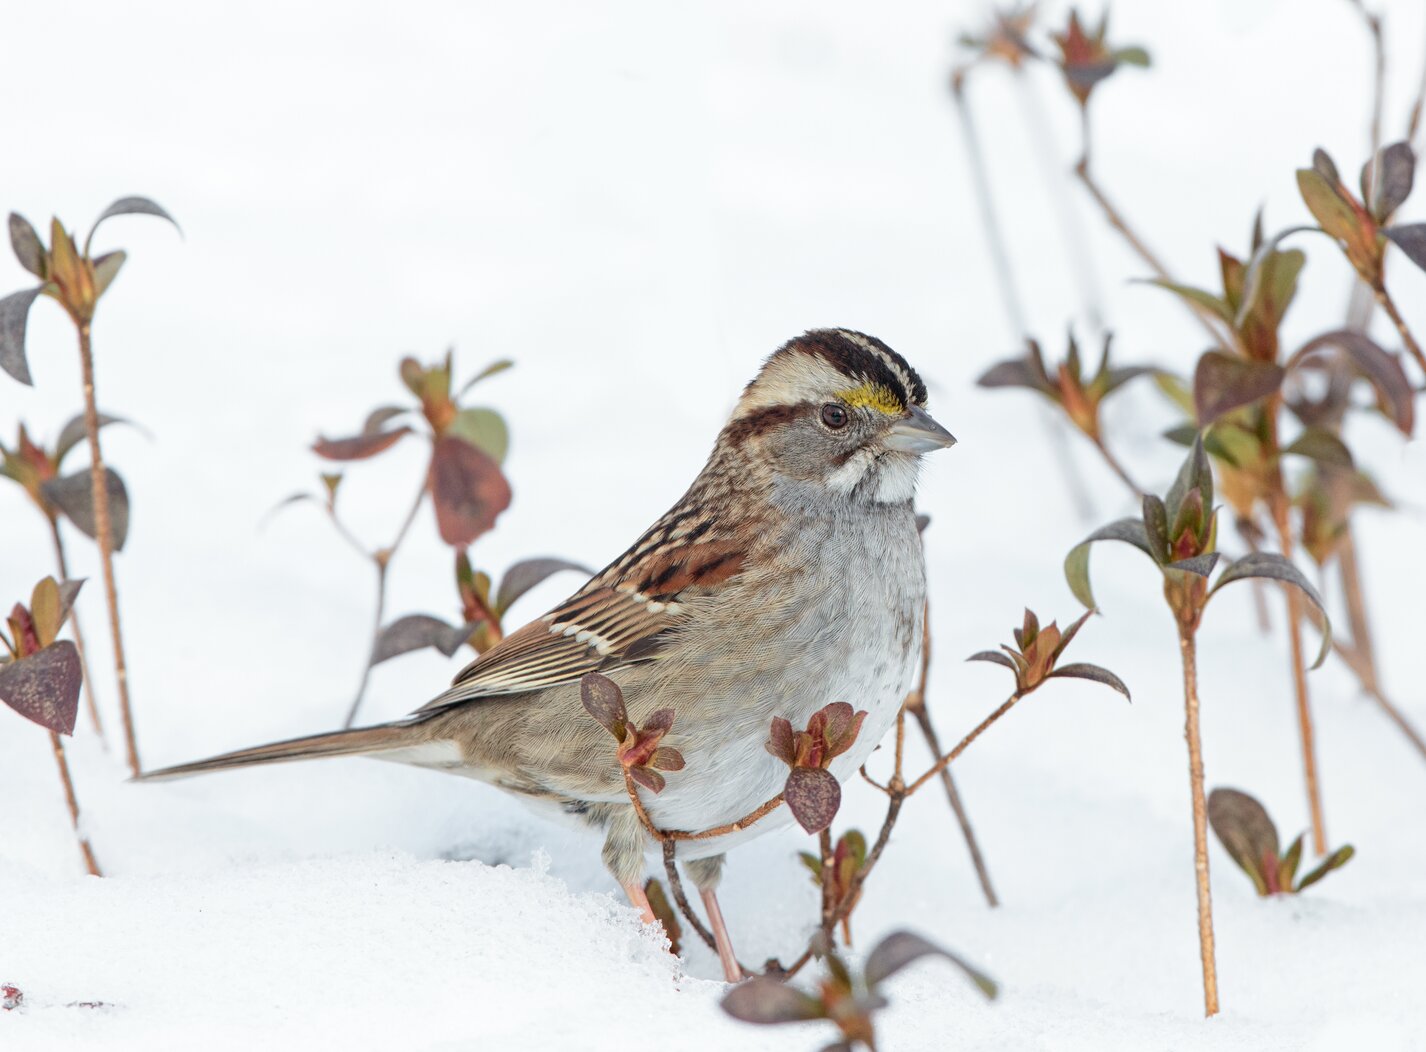 The White-throated Sparrow has been the most frequently found collision victim by Project Safe Flight volunteers since our patrols began in 1997. Photo: <a href="https://laurameyers.photoshelter.com/index" target="_blank">Laura Meyers</a> 